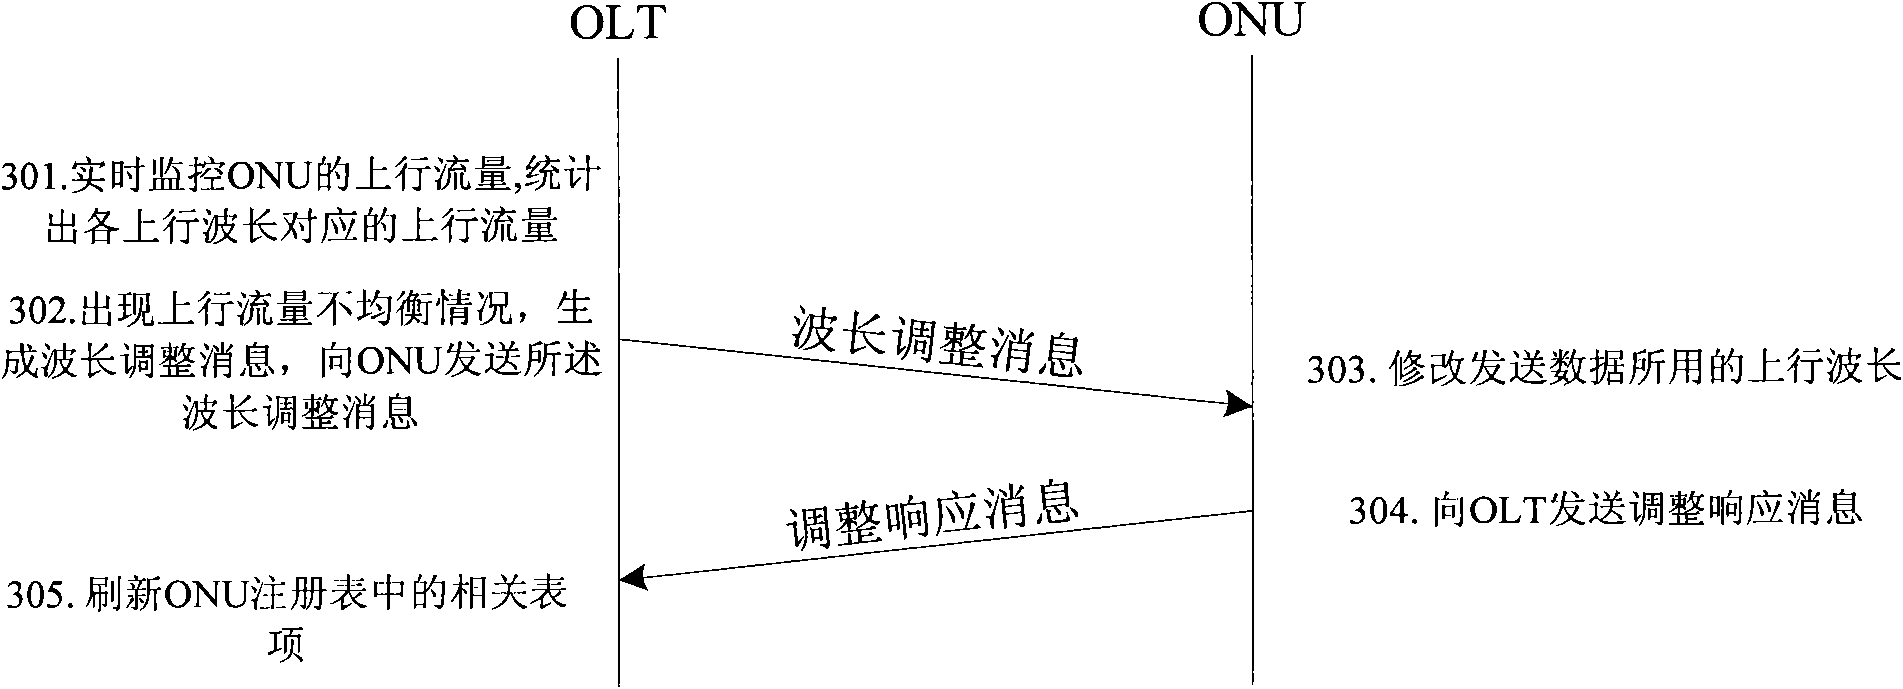 Passive optical network system, optical line terminal and optical network units